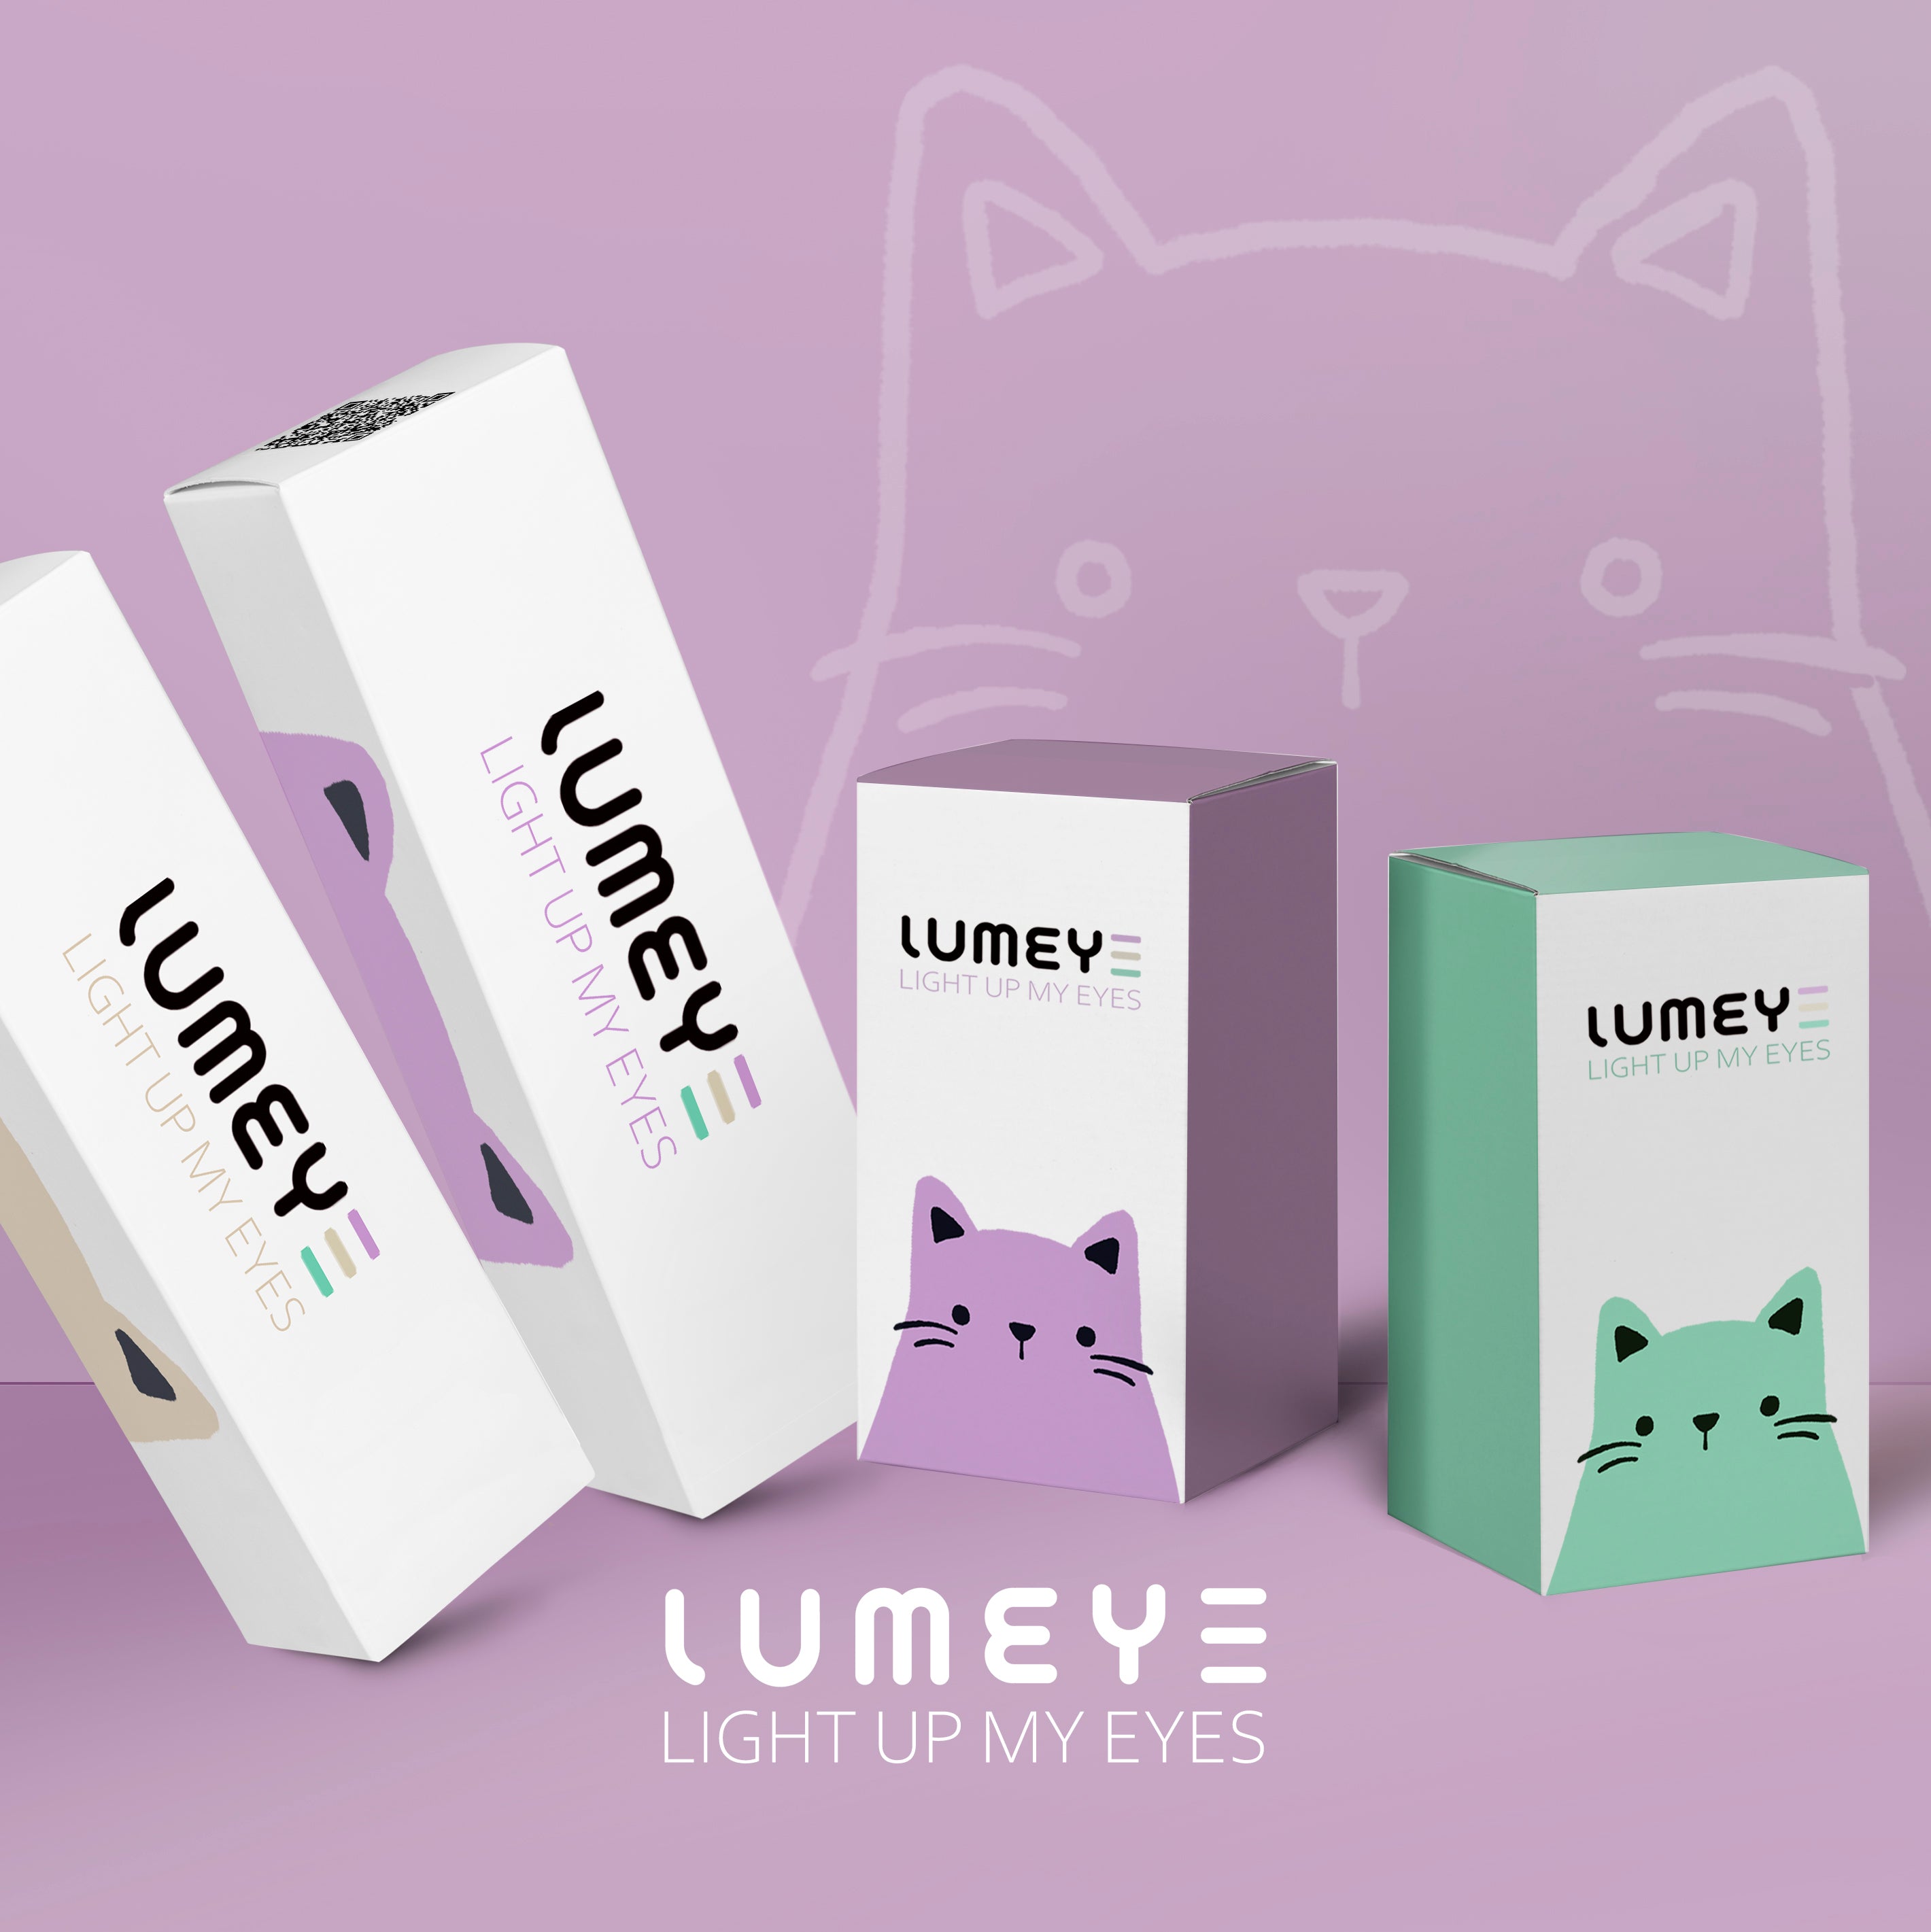 Best COLORED CONTACTS - LUMEYE Himalaya Gray Colored Contact Lenses - LUMEYE